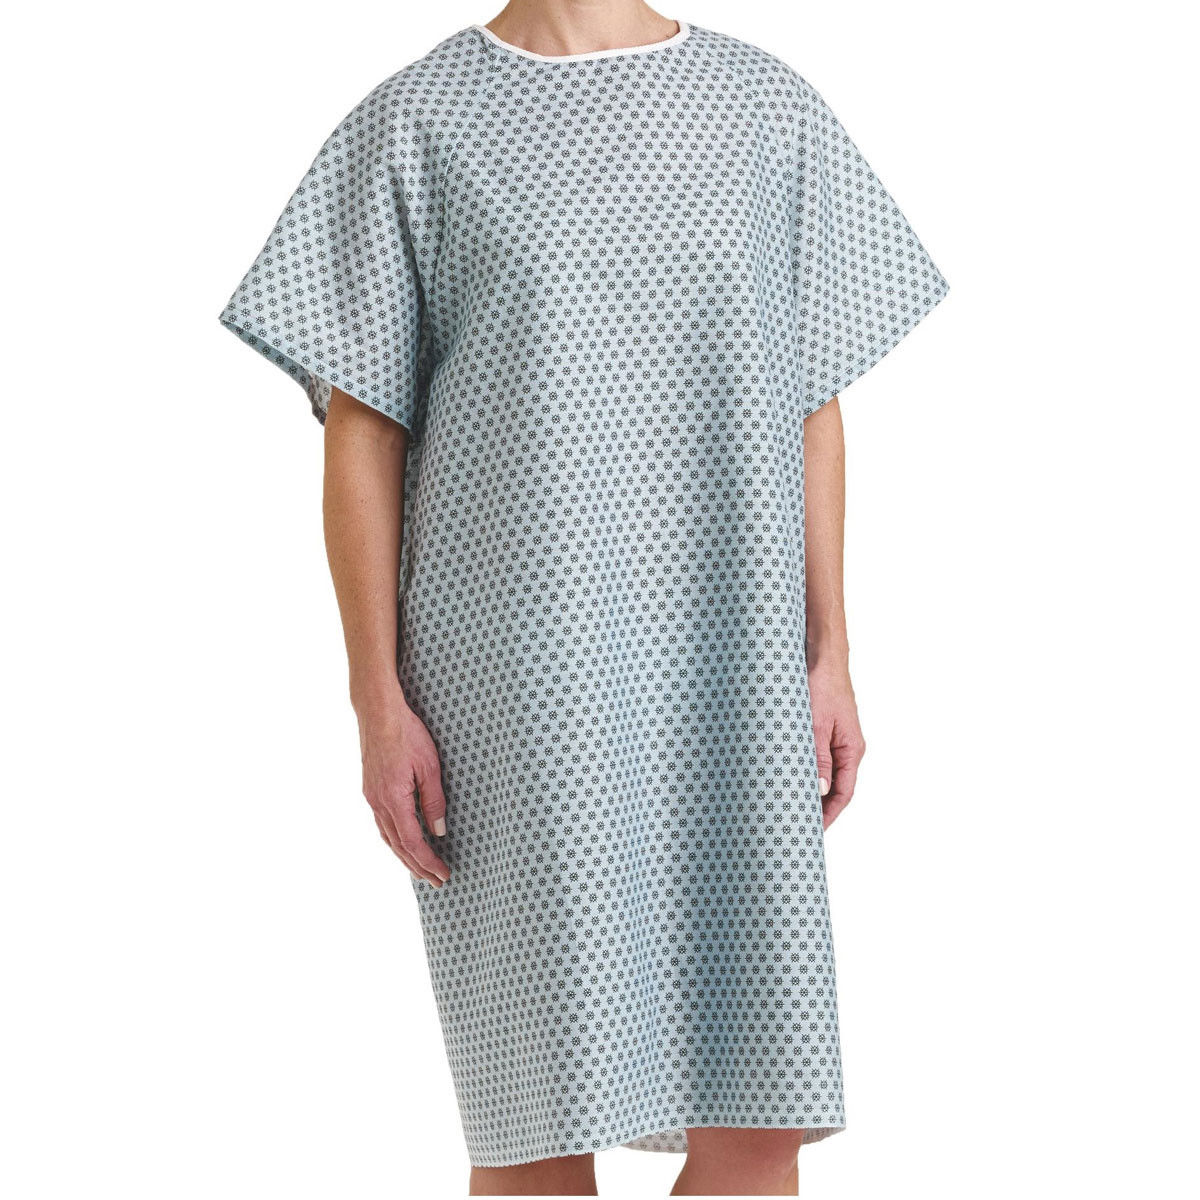 Traditional Patient Gown Questions & Answers